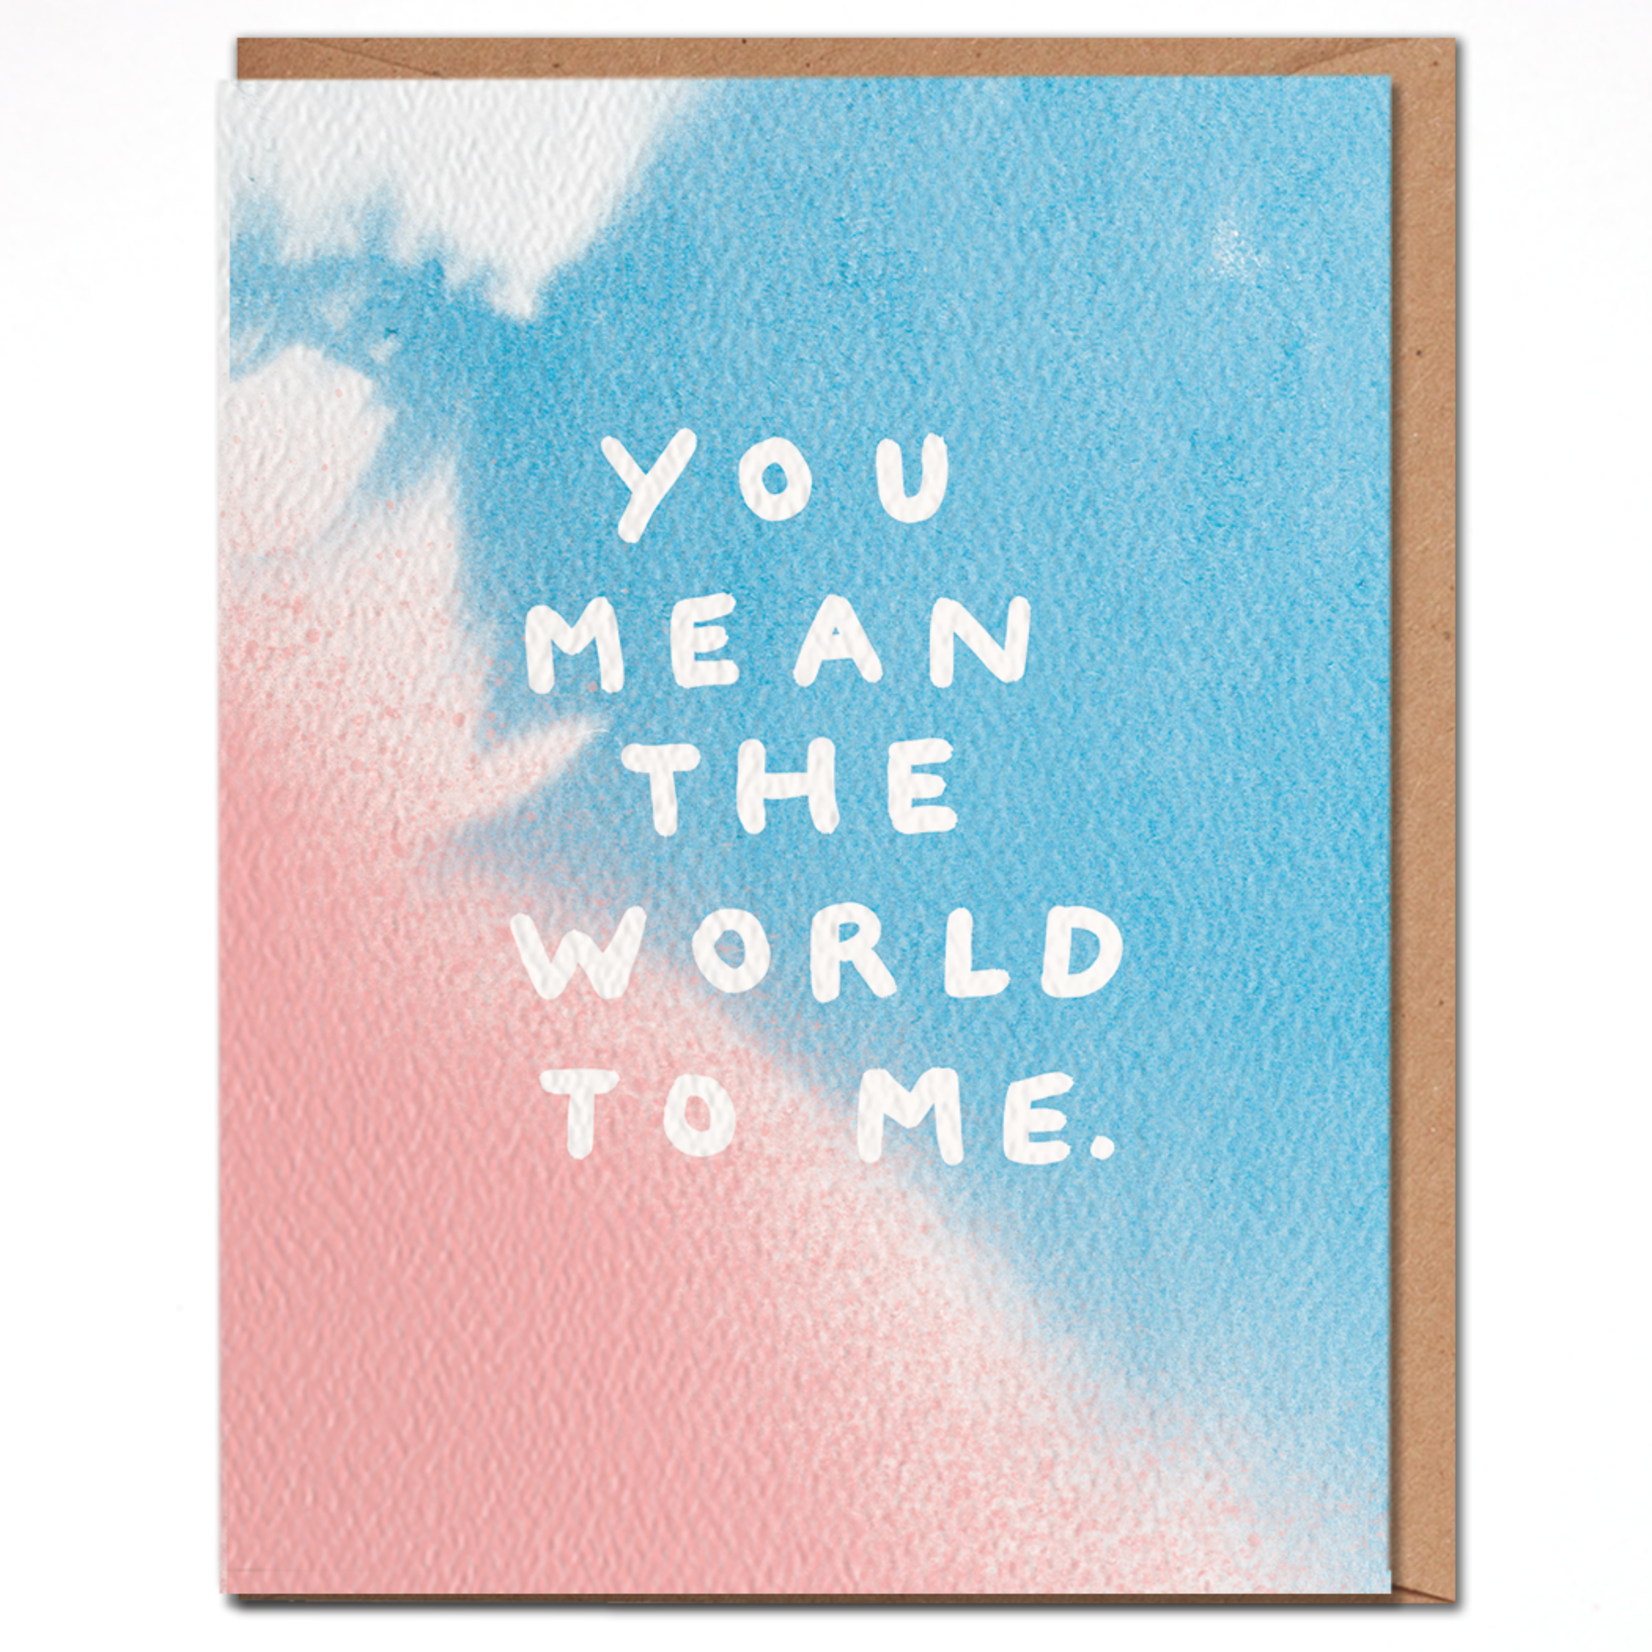 You Mean The World To Me card